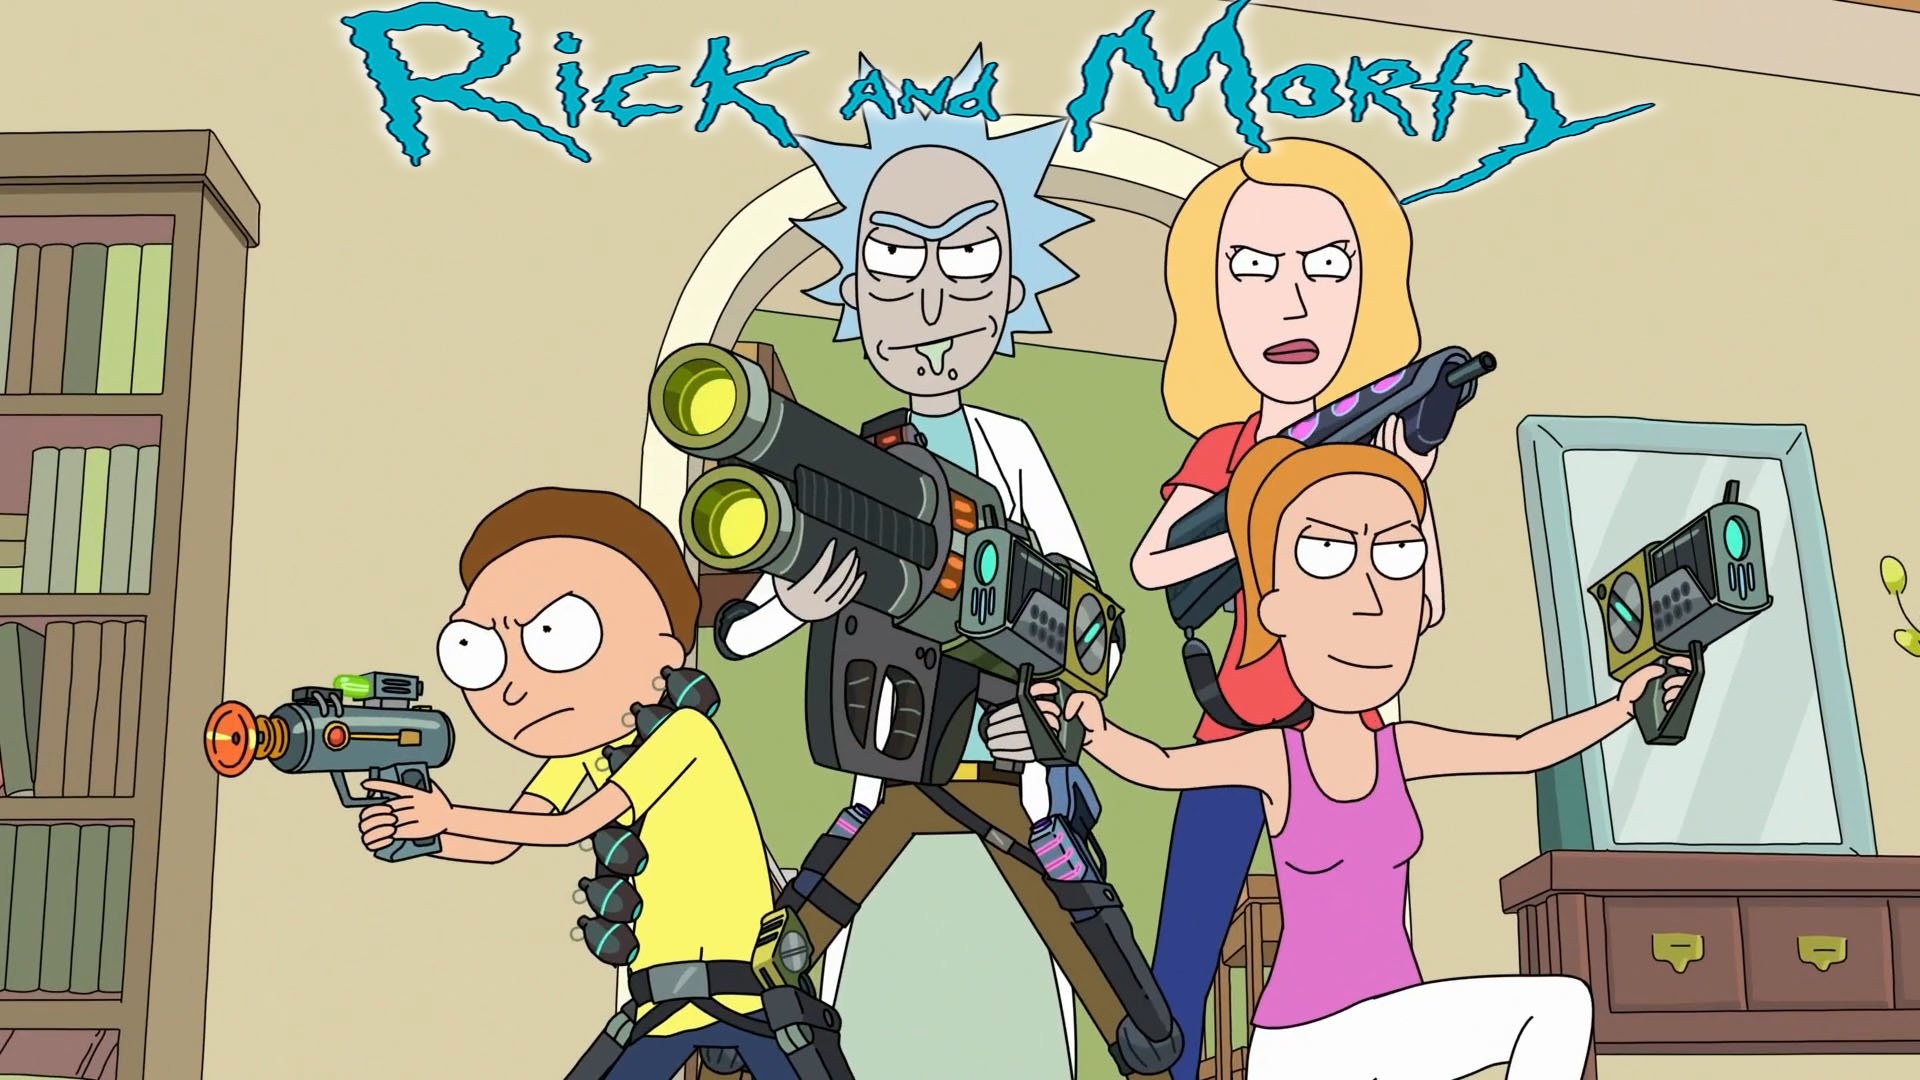 Rick and Morty wallpaper ·① Download free HD wallpapers of Rick and